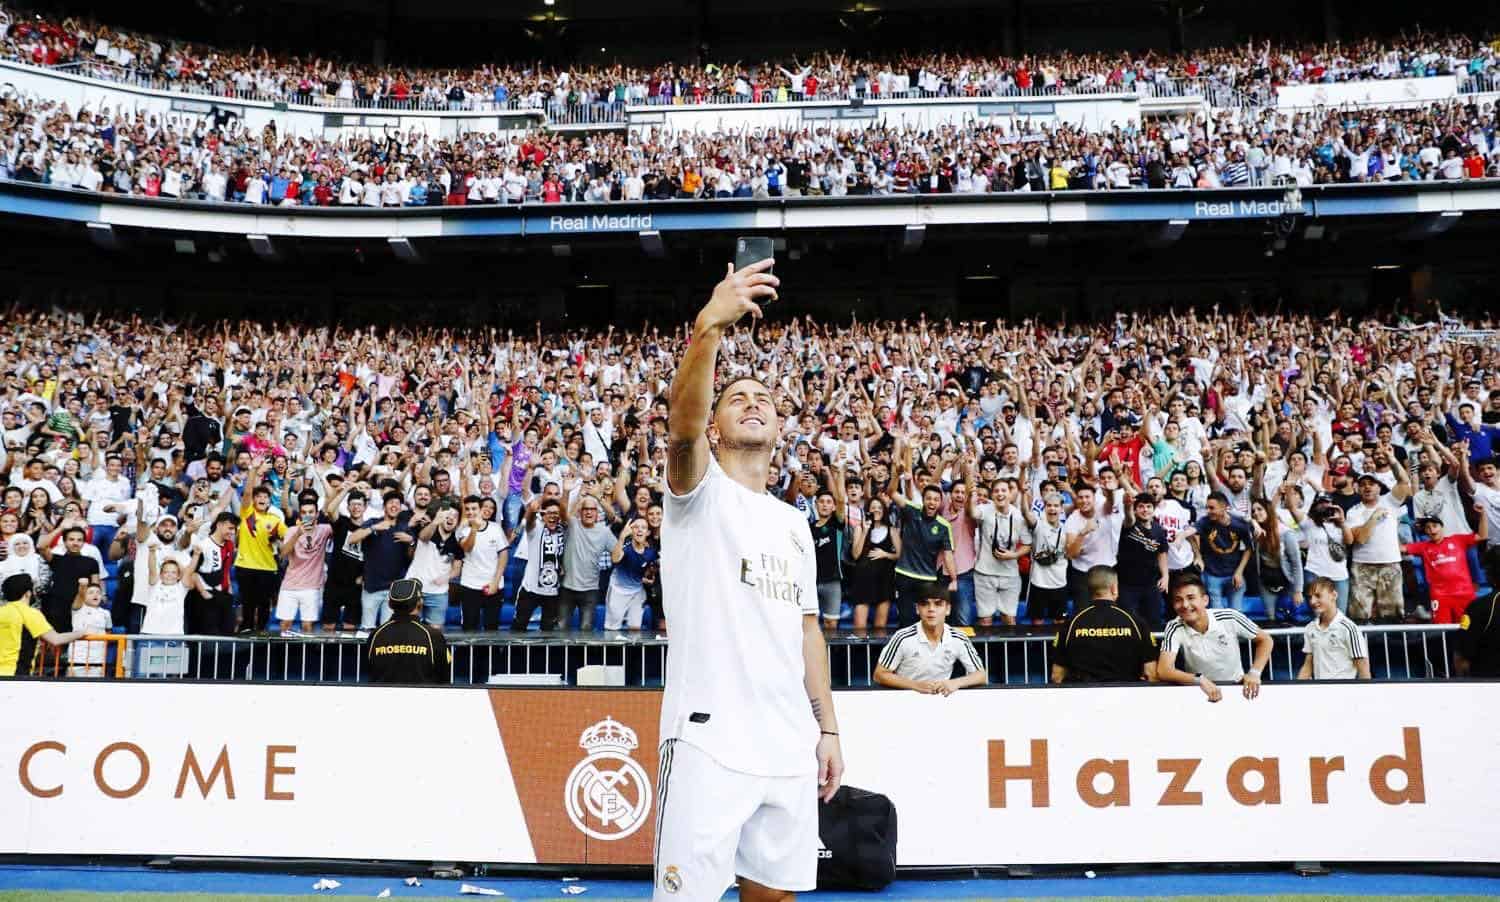 Eden Hazard taking selfie with fans during his Real Madrid unveiling